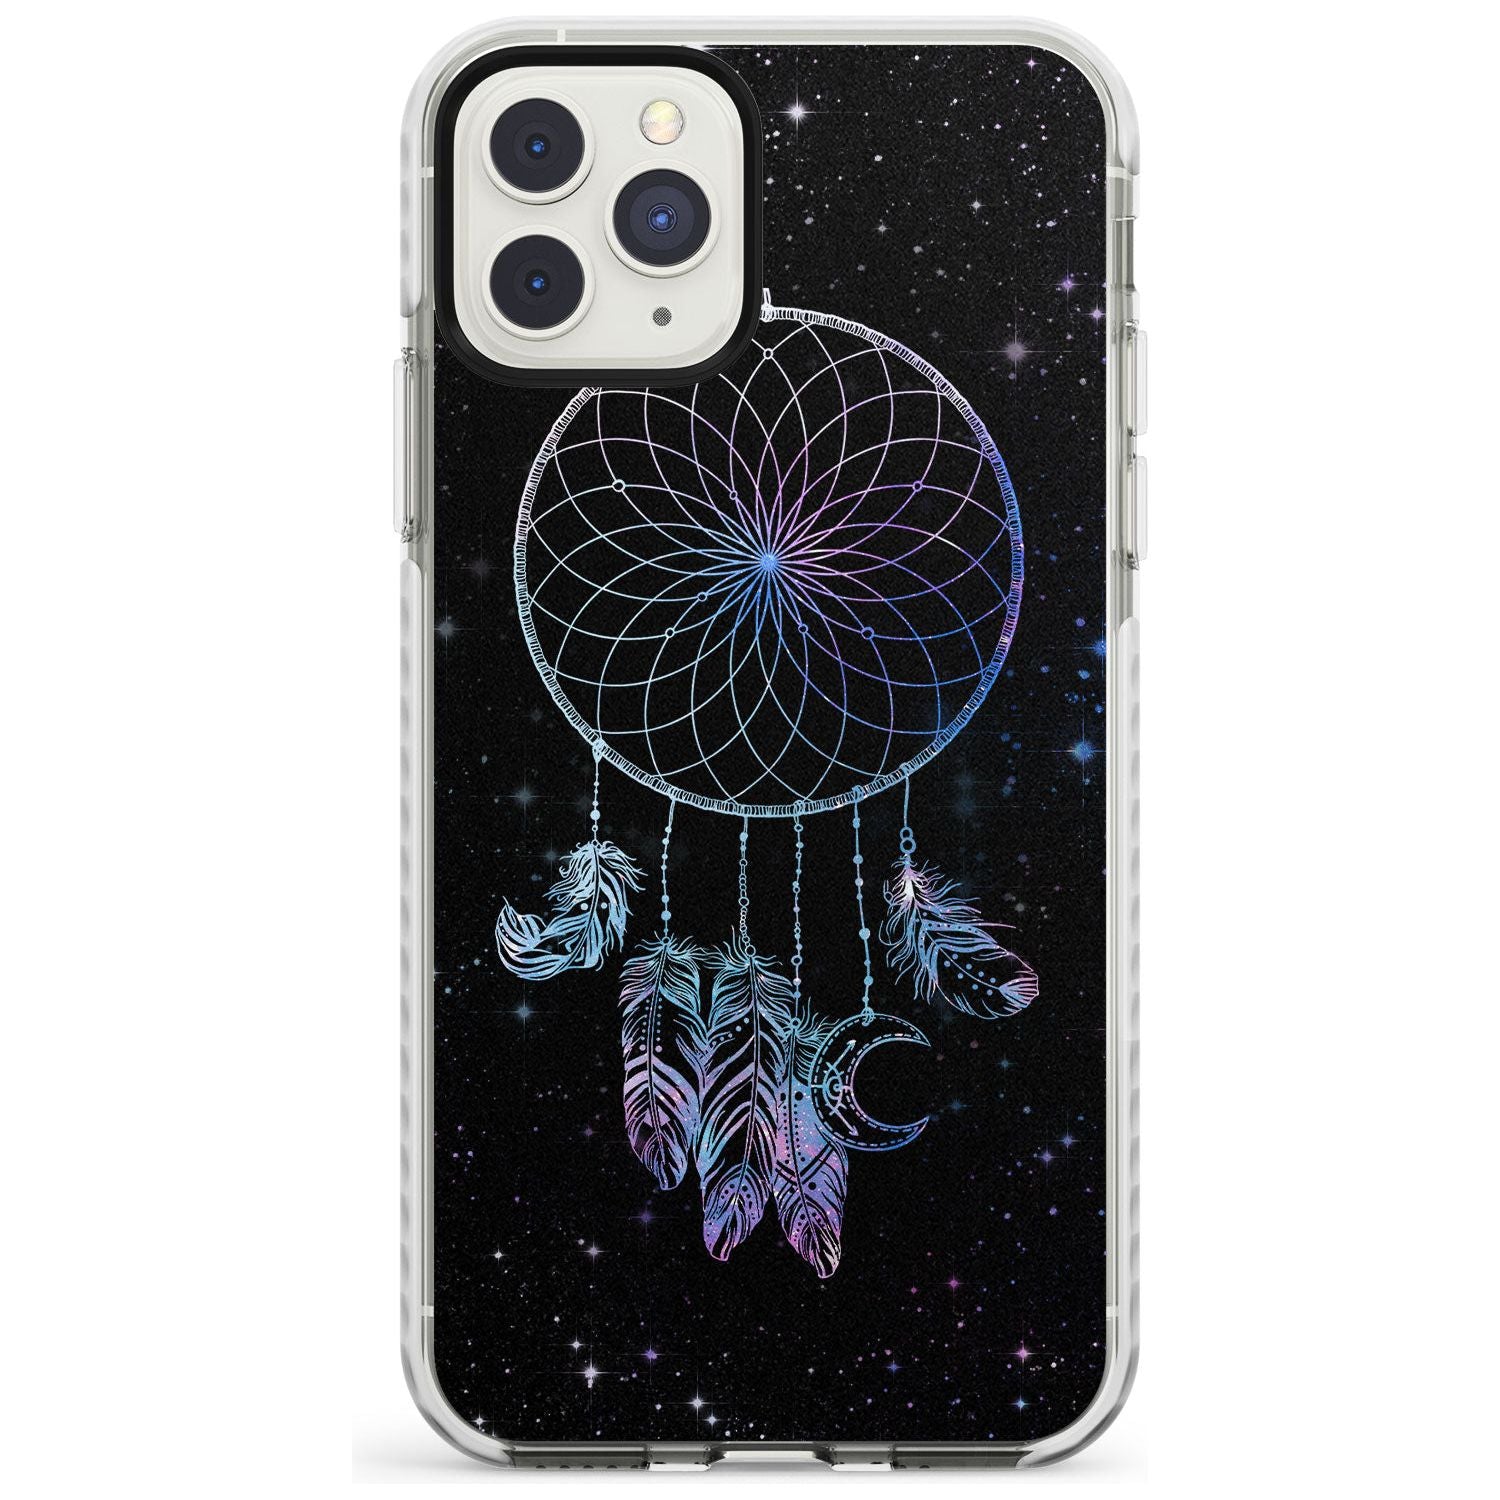 Dreamcatcher Space Stars Galaxy Print Impact Phone Case for iPhone 11 Pro Max